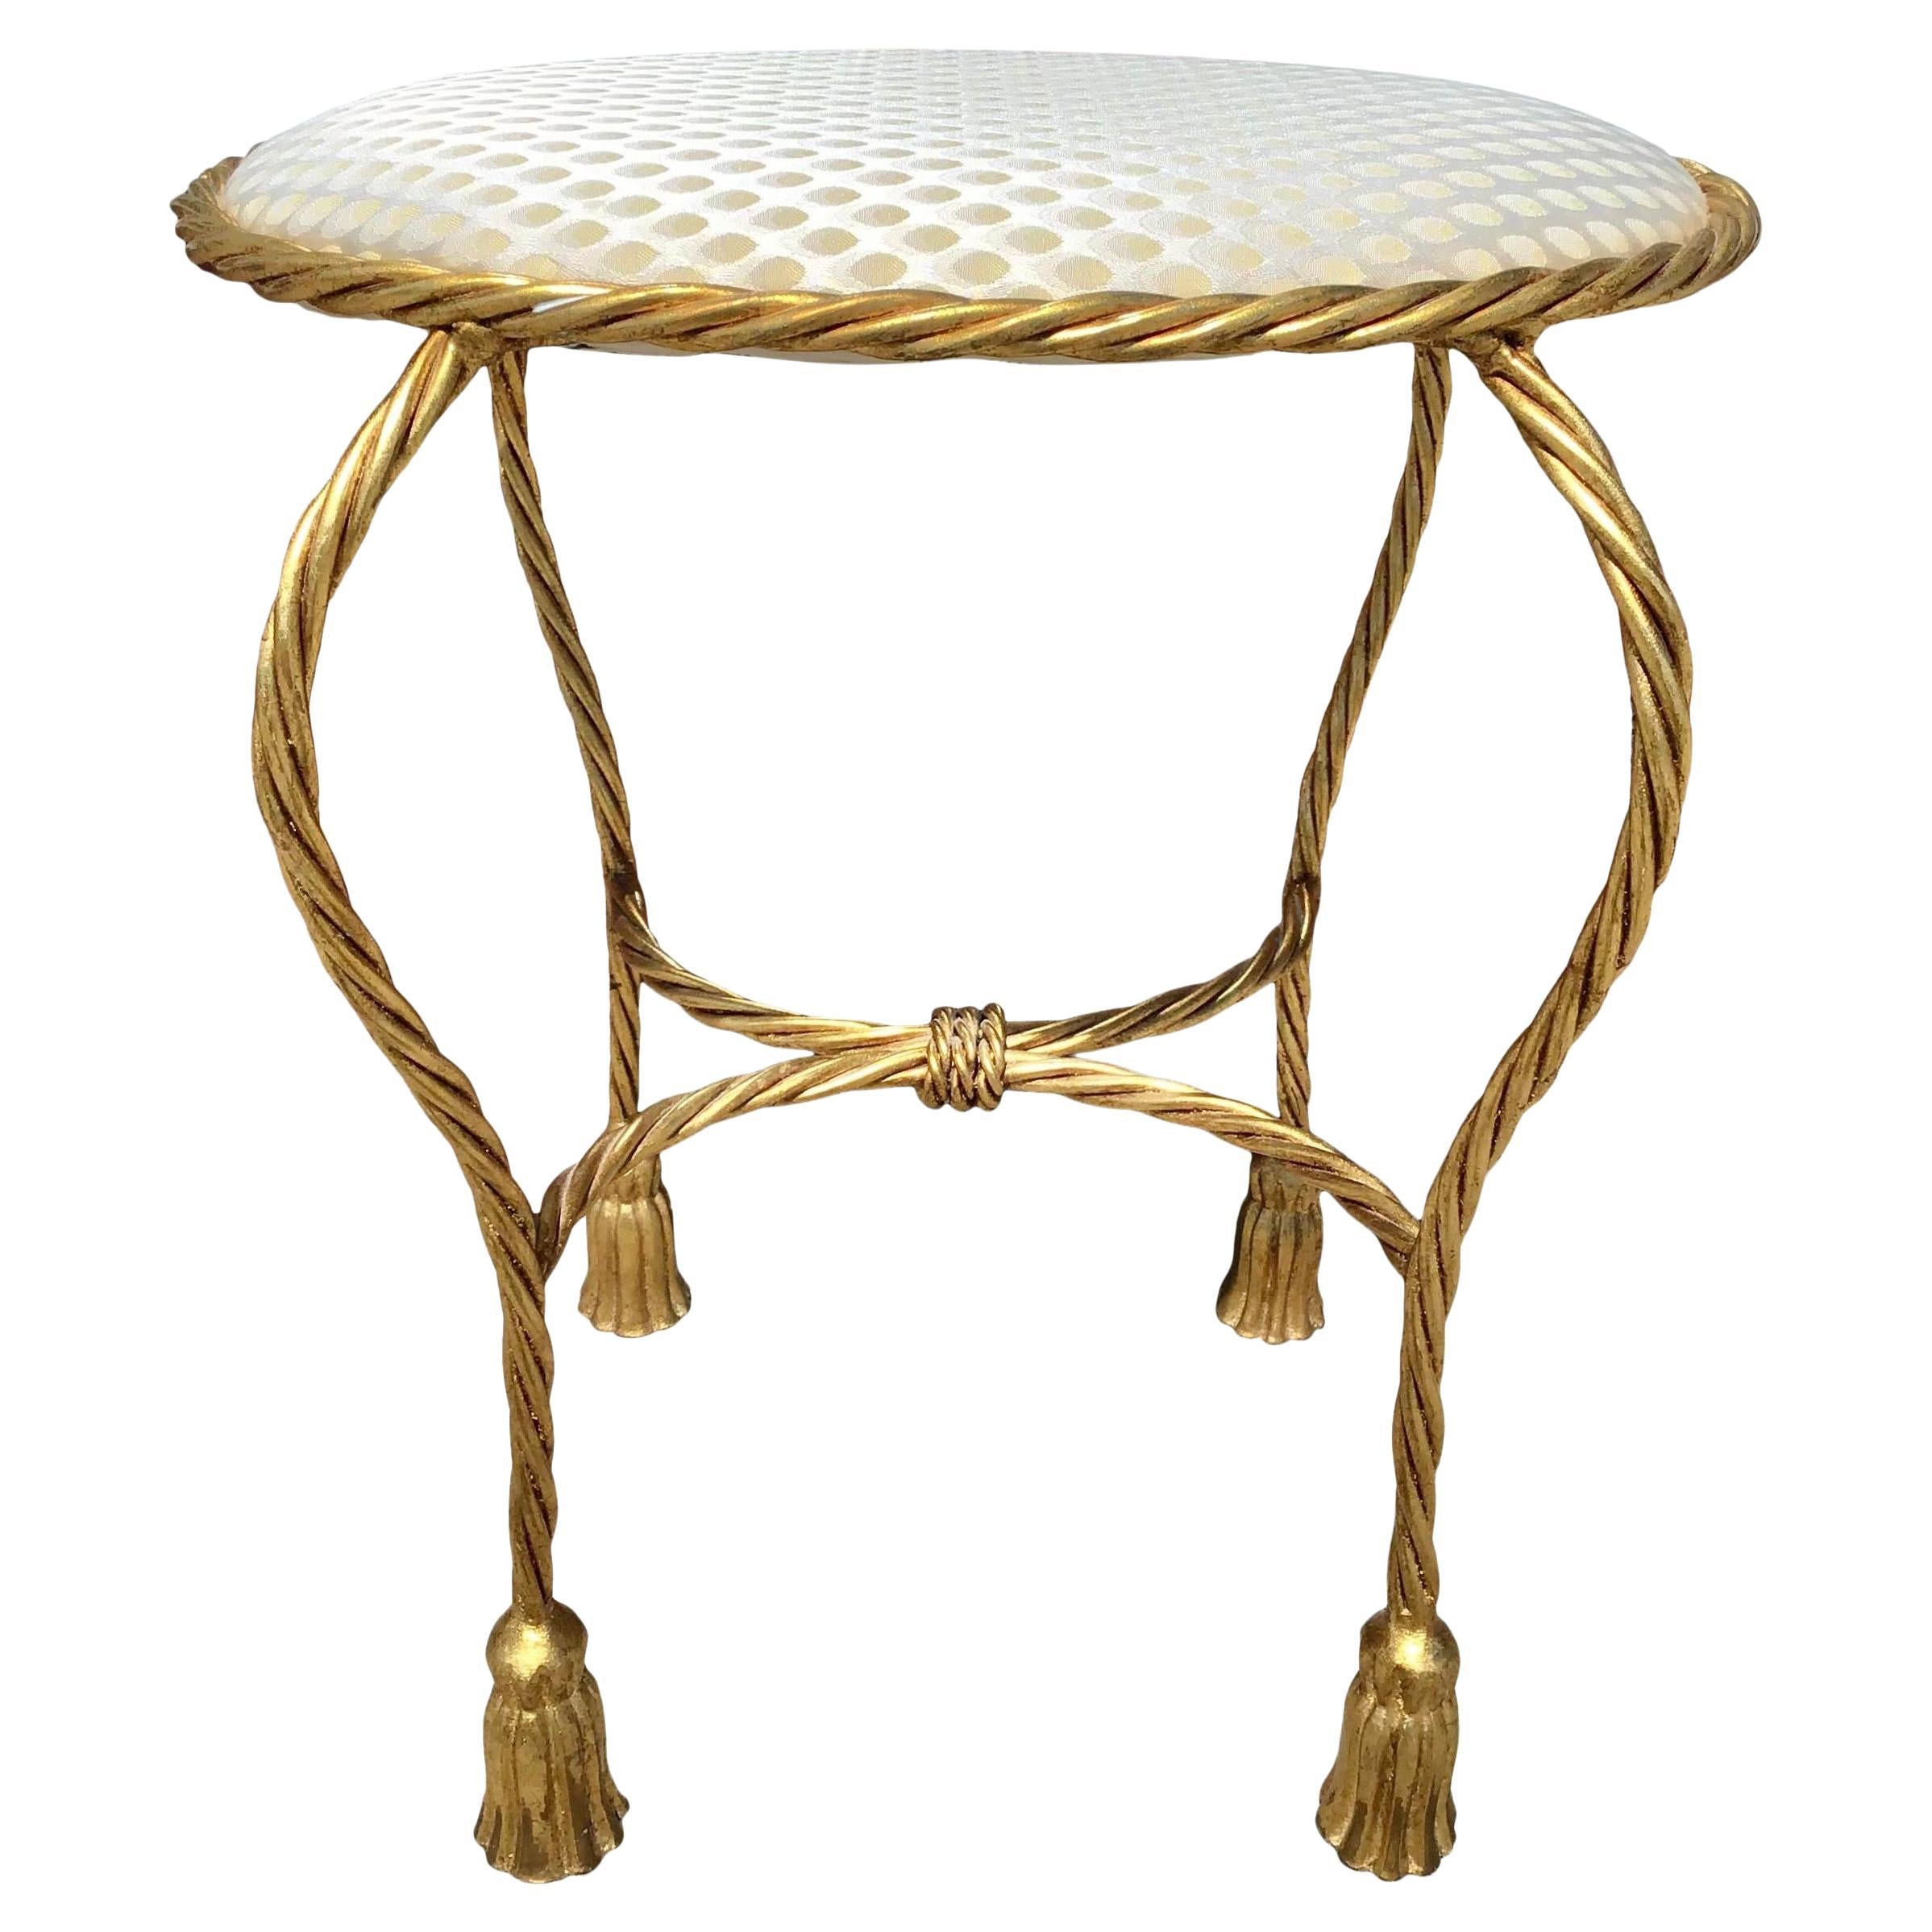 Oval Bench With Tassel Motif in Gold